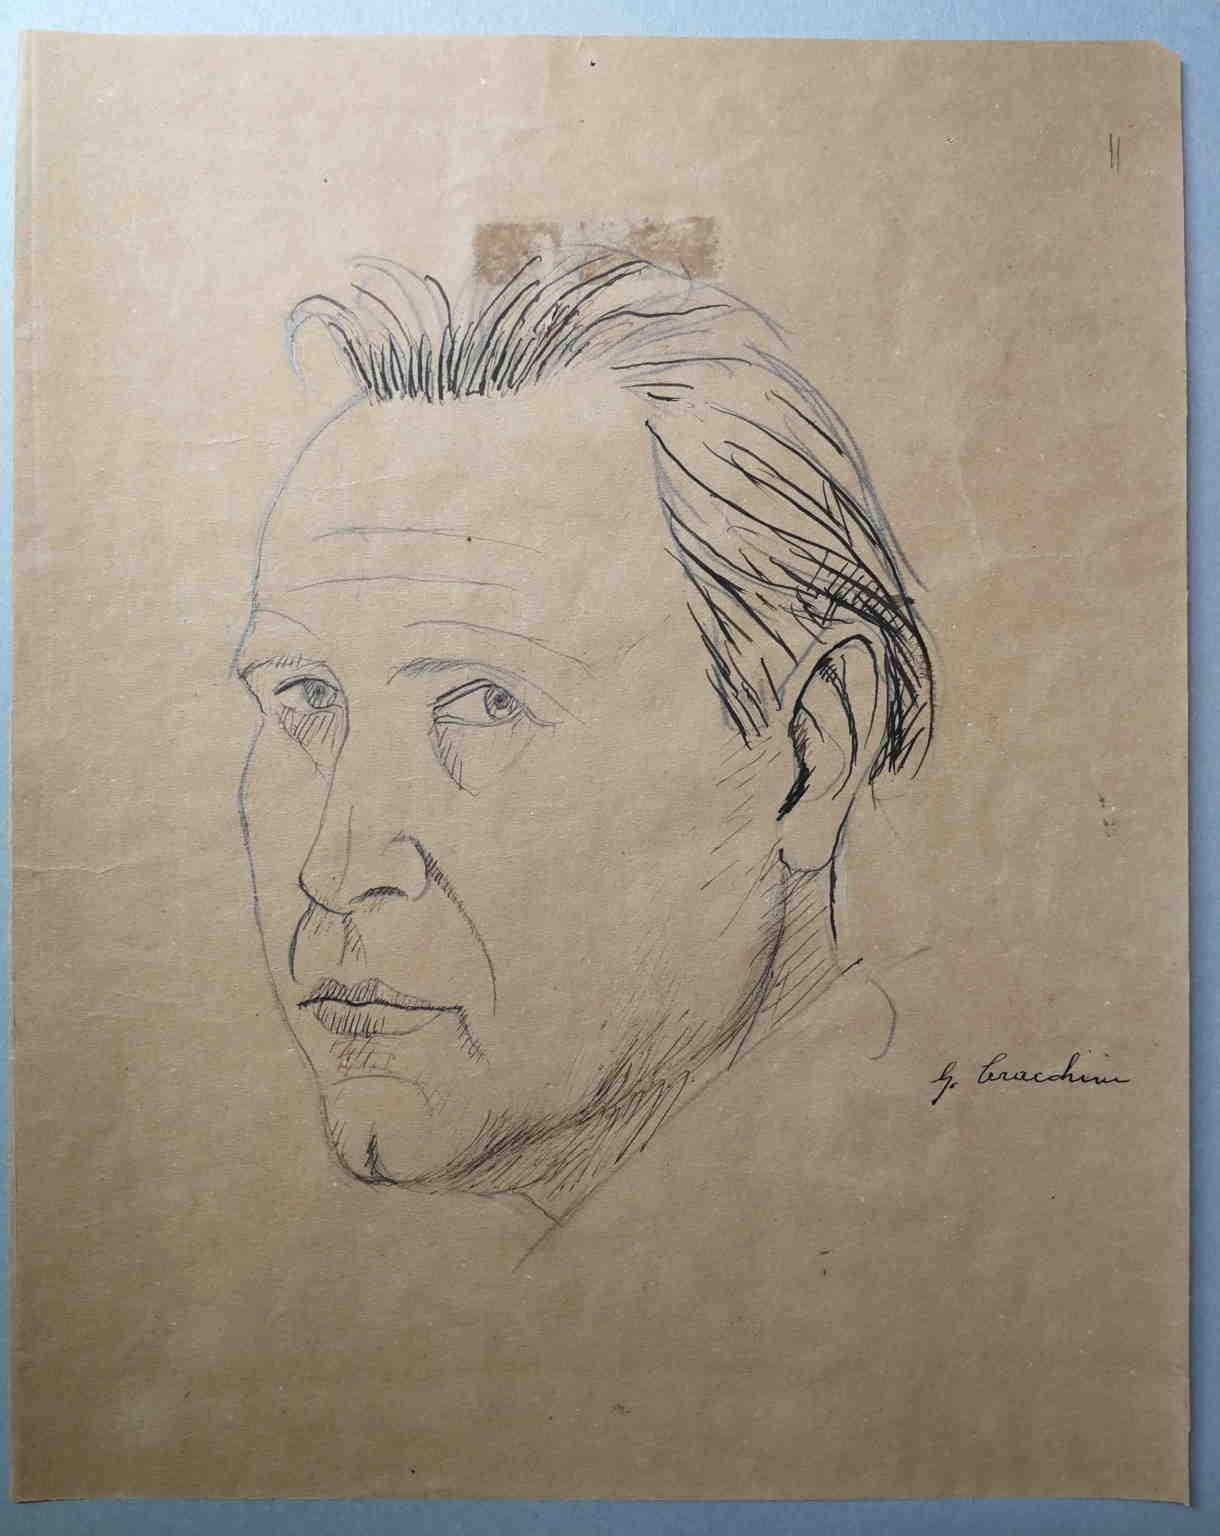 The drawing is a self portrait of the tuscan artist Gisberto Ceracchini. Considering the age at the moment and the fact that his birth year was the 1899, it can be dated to the 1930s-1940s.

Gisberto Ceracchini was an italian artist that despite his